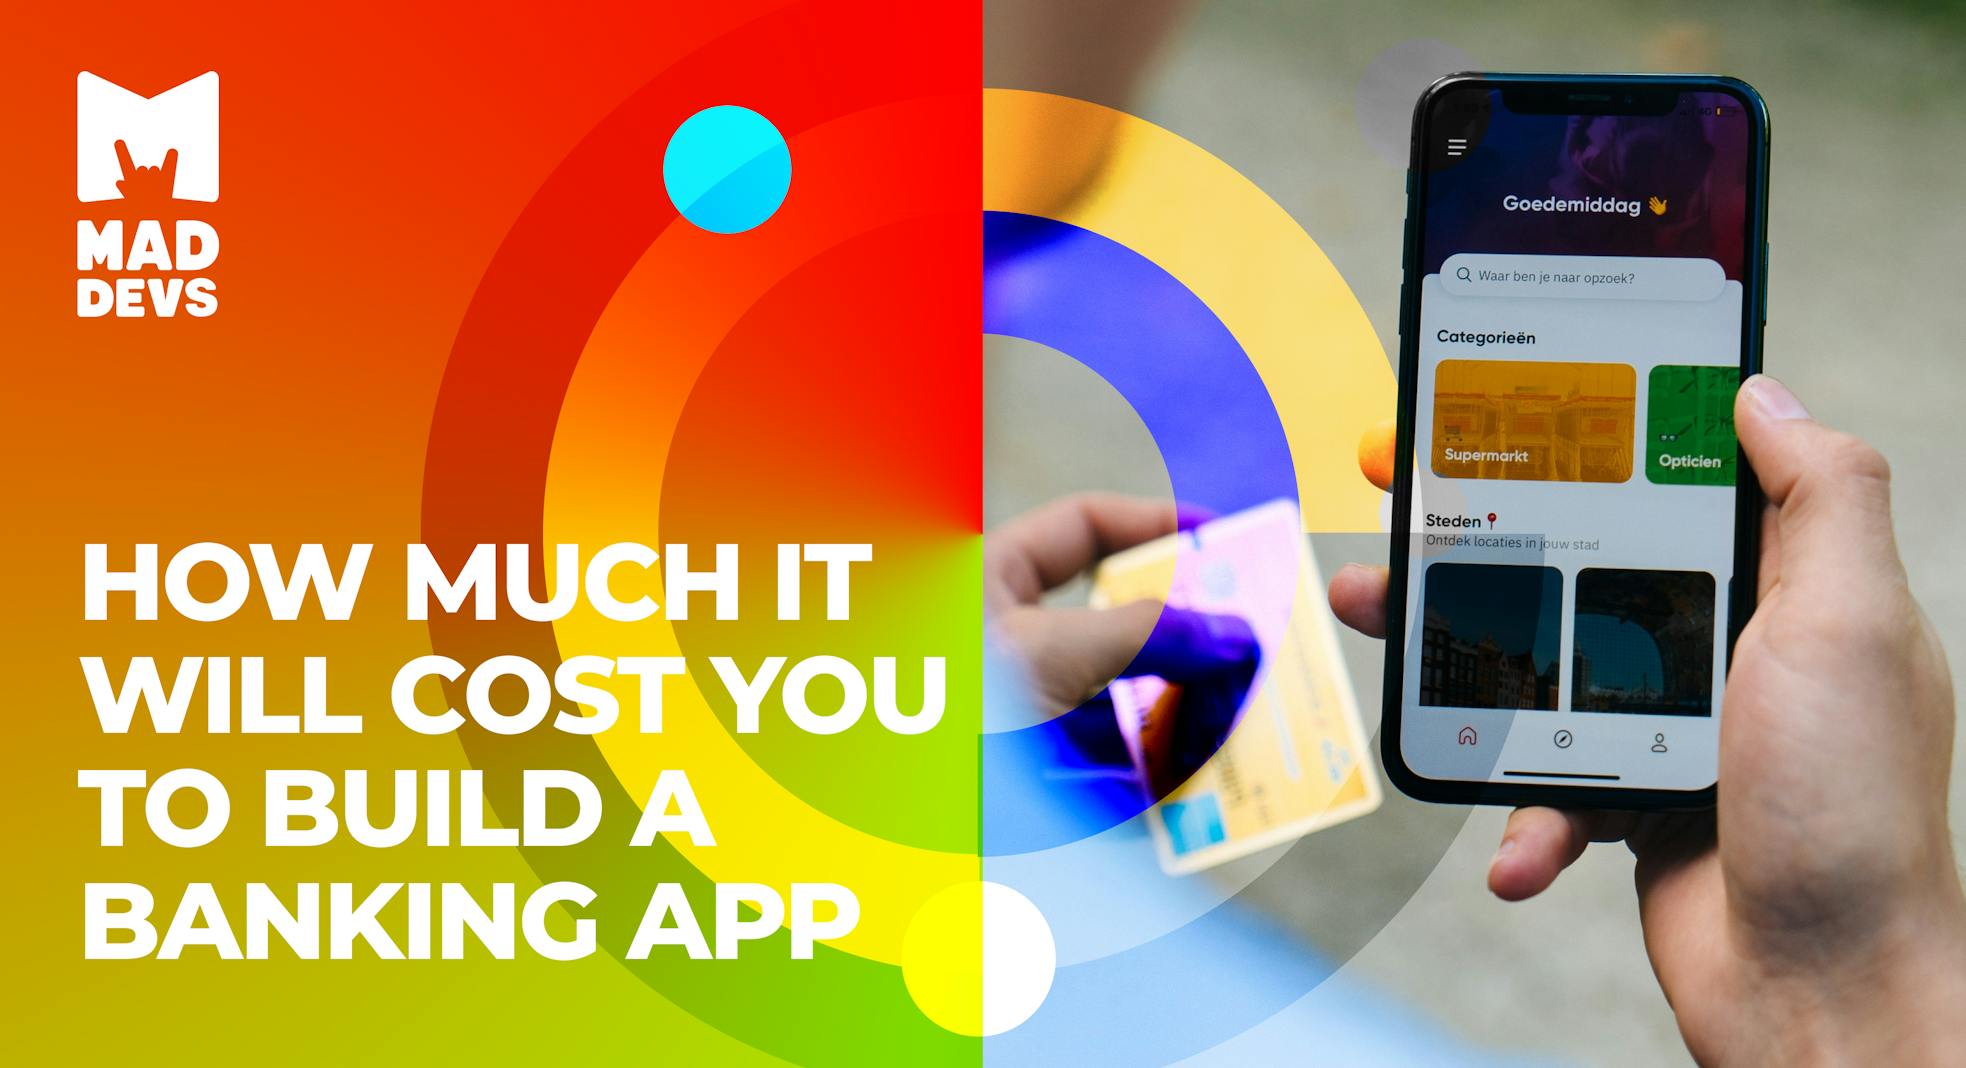 How Much Will It Cost You to Build a Banking App